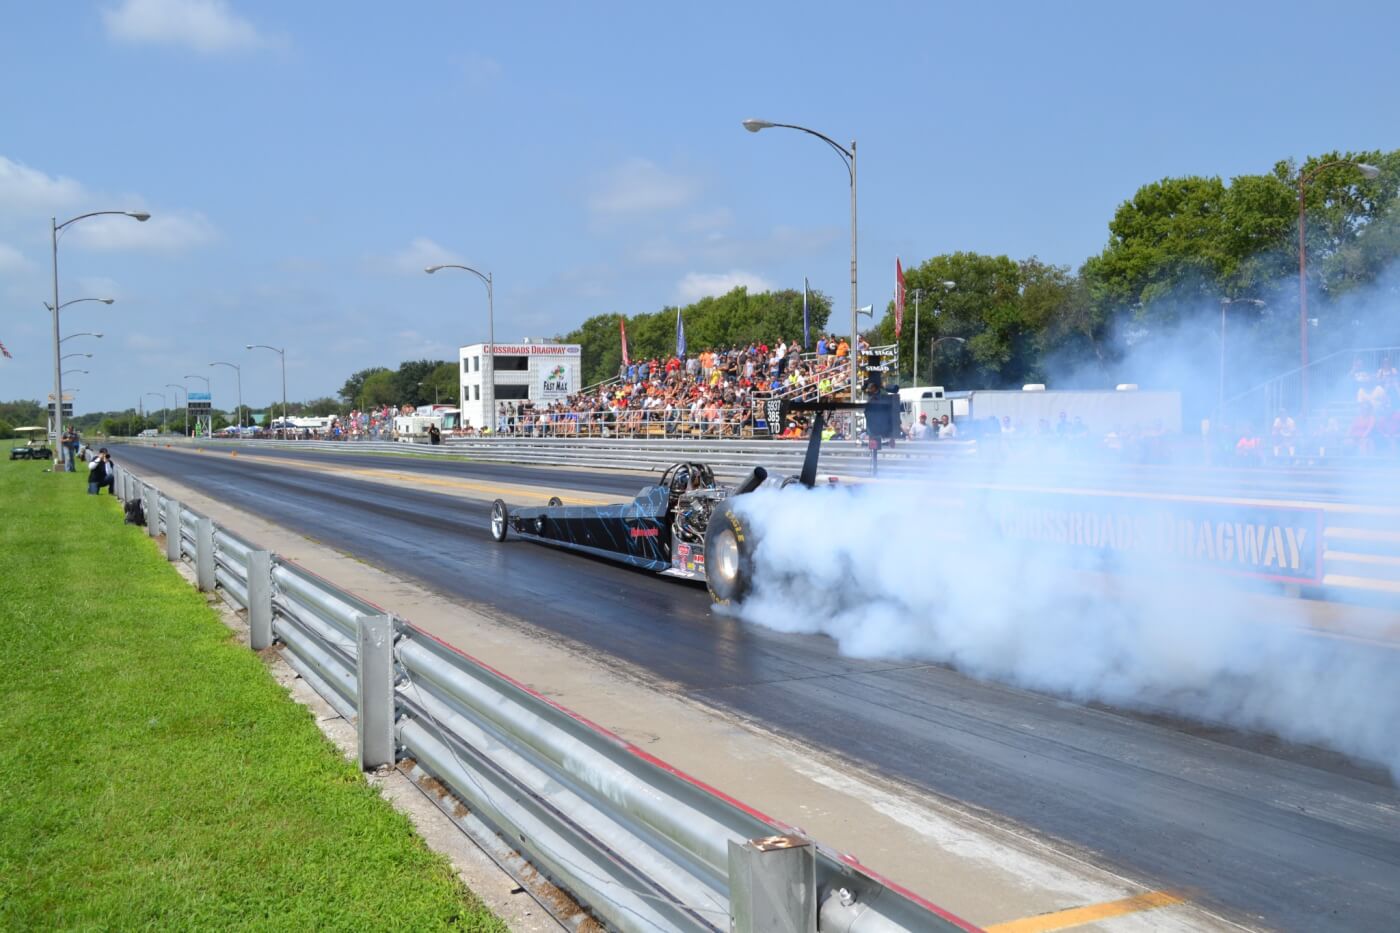 The quickest and fastest diesel drag vehicle is Scheid Diesel's Dragster, which has run 6.32 at 228mph in the quarter-mile! The Scheid dragster uses a 2,500-hp Cummins-based engine hooked through a triple-disc clutch to a Lenco transmission.